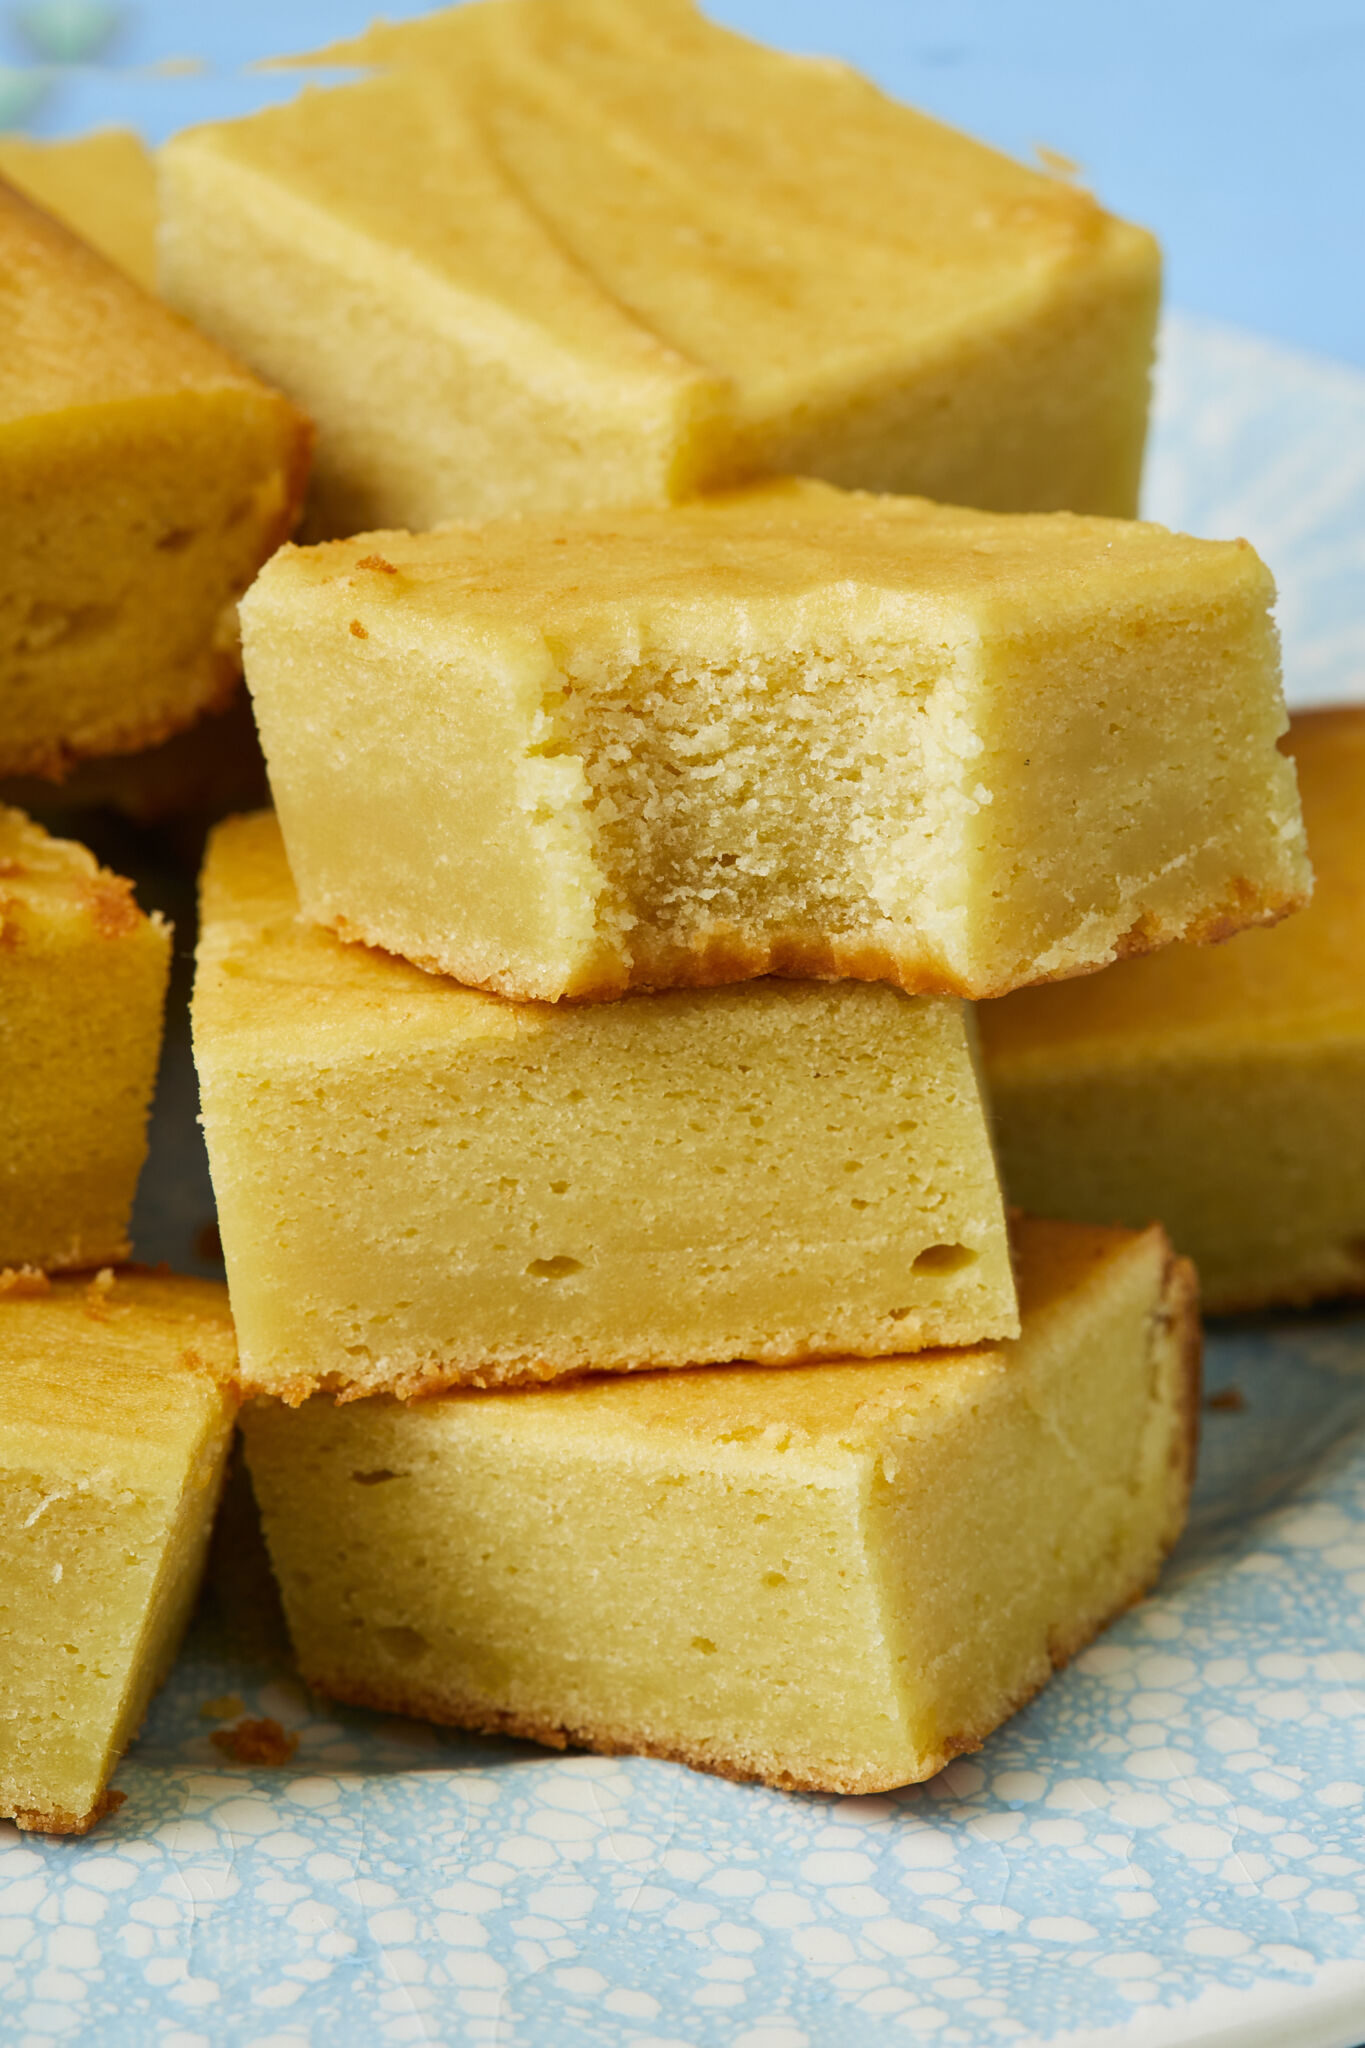 A close shot at a pile of golden luscious Mango Butter Mochi on a light teal-blue plate. A bite has taken from the front piece, showing the silky soft texture on top and crispy crust at the bottom.